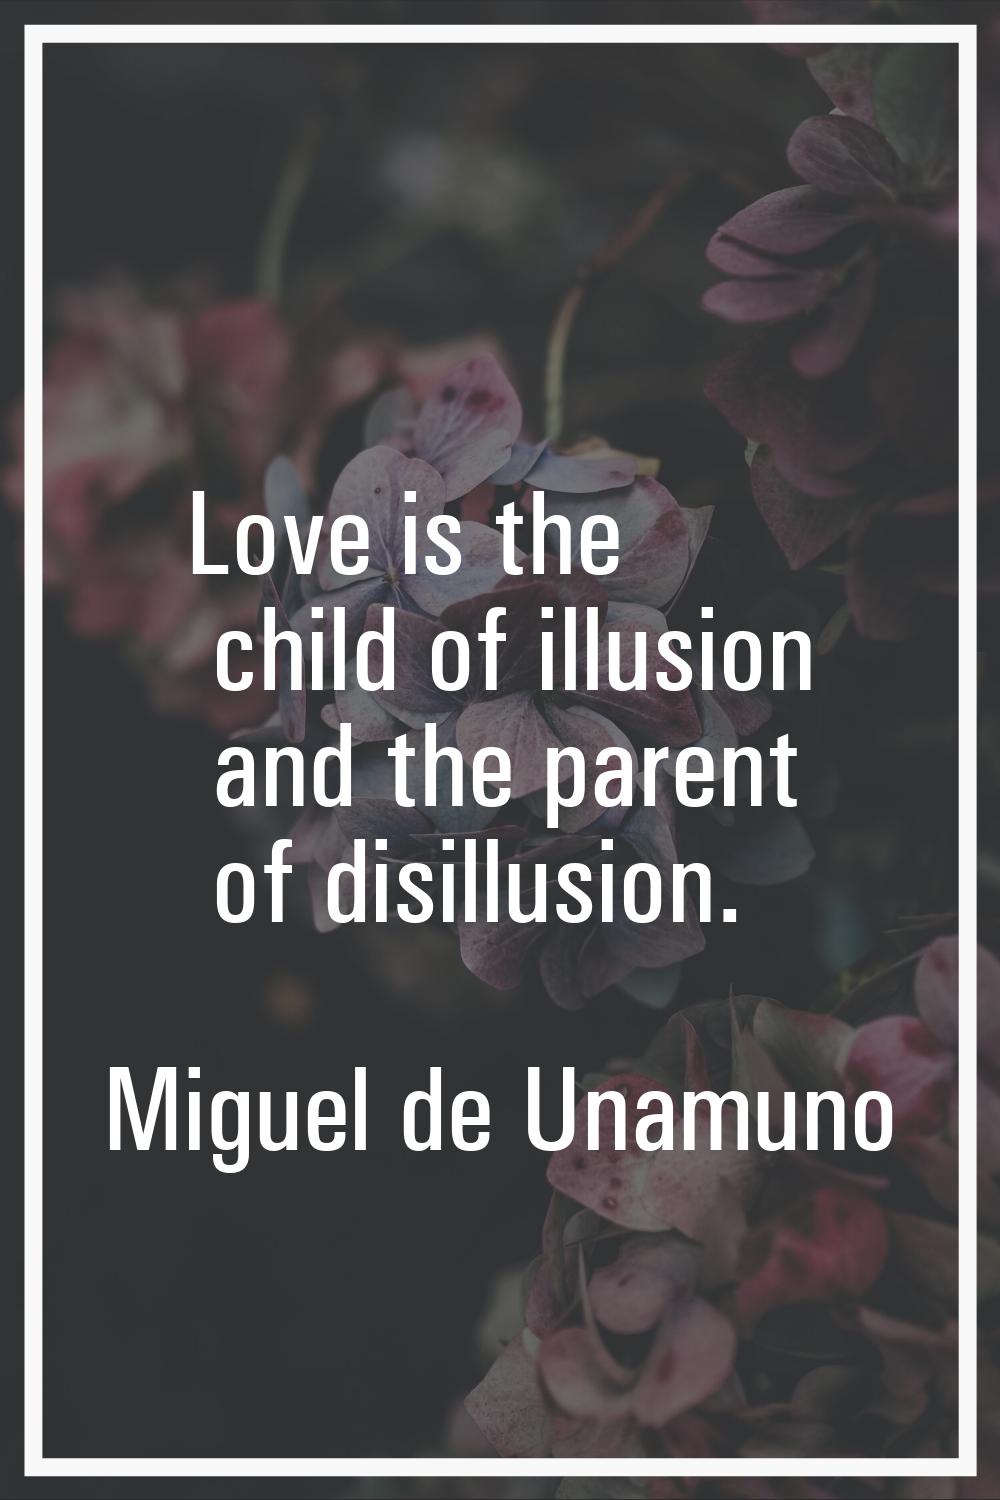 Love is the child of illusion and the parent of disillusion.